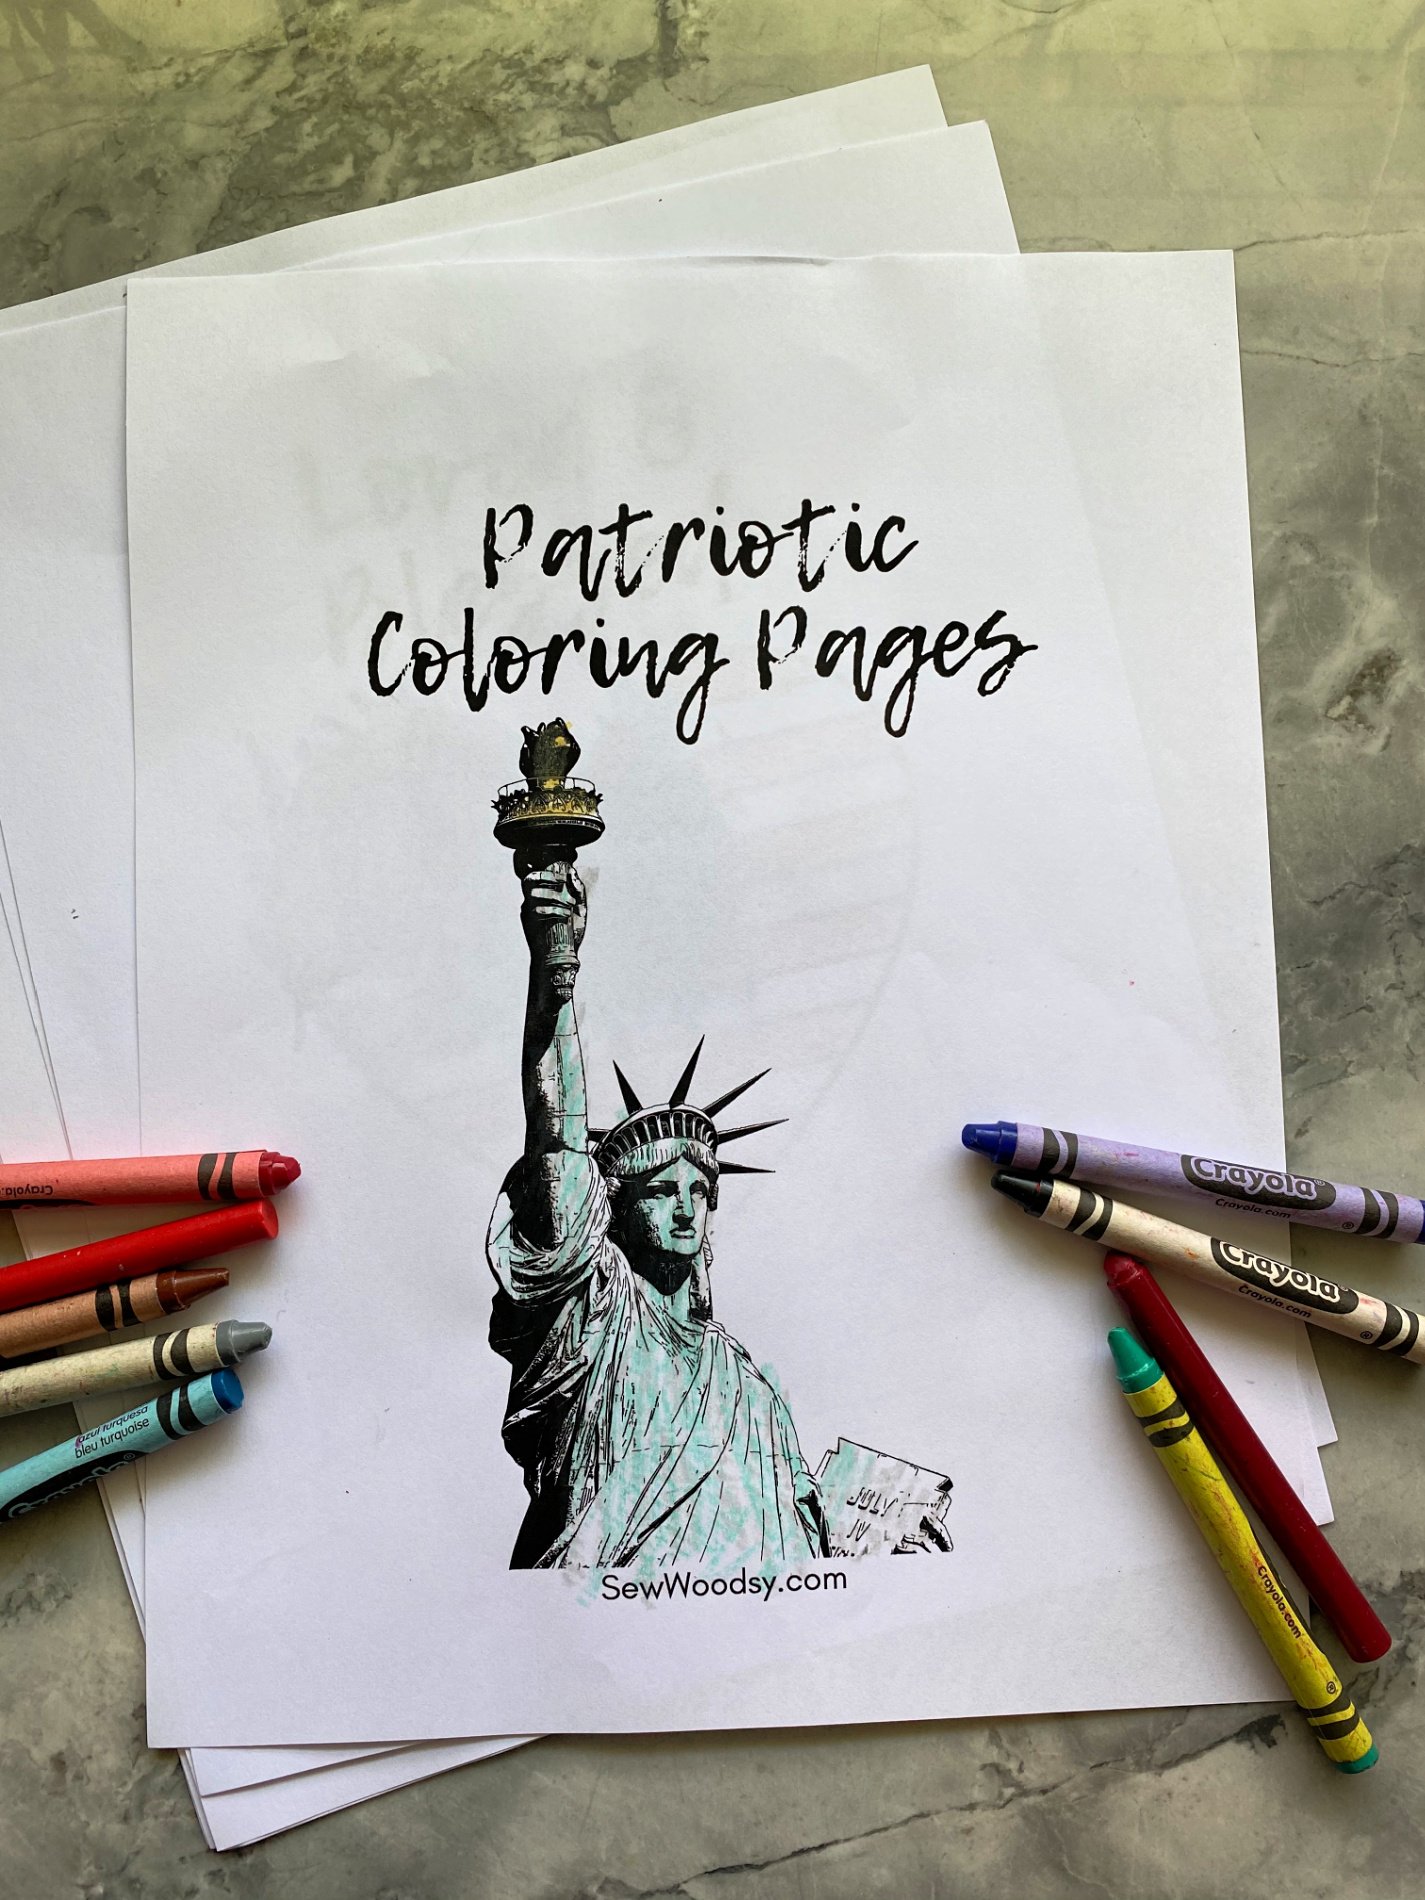 White coloring pages on marble countertop. Top coloring page of statue of liberty with crayons surrounding it.